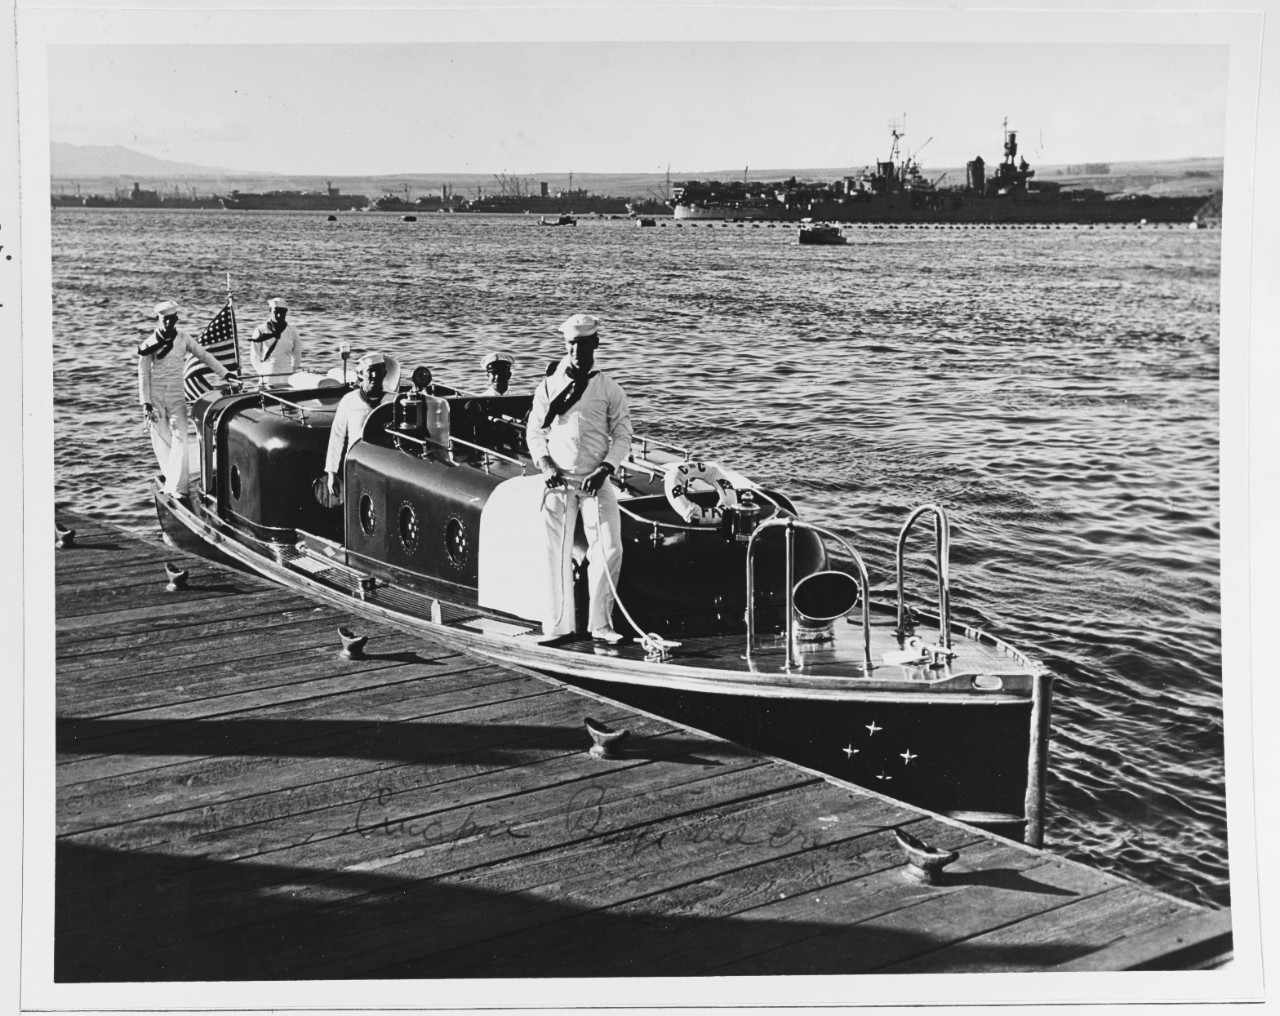 Admiral Chester W. Nimitz's (CinCPac) barge and crew.